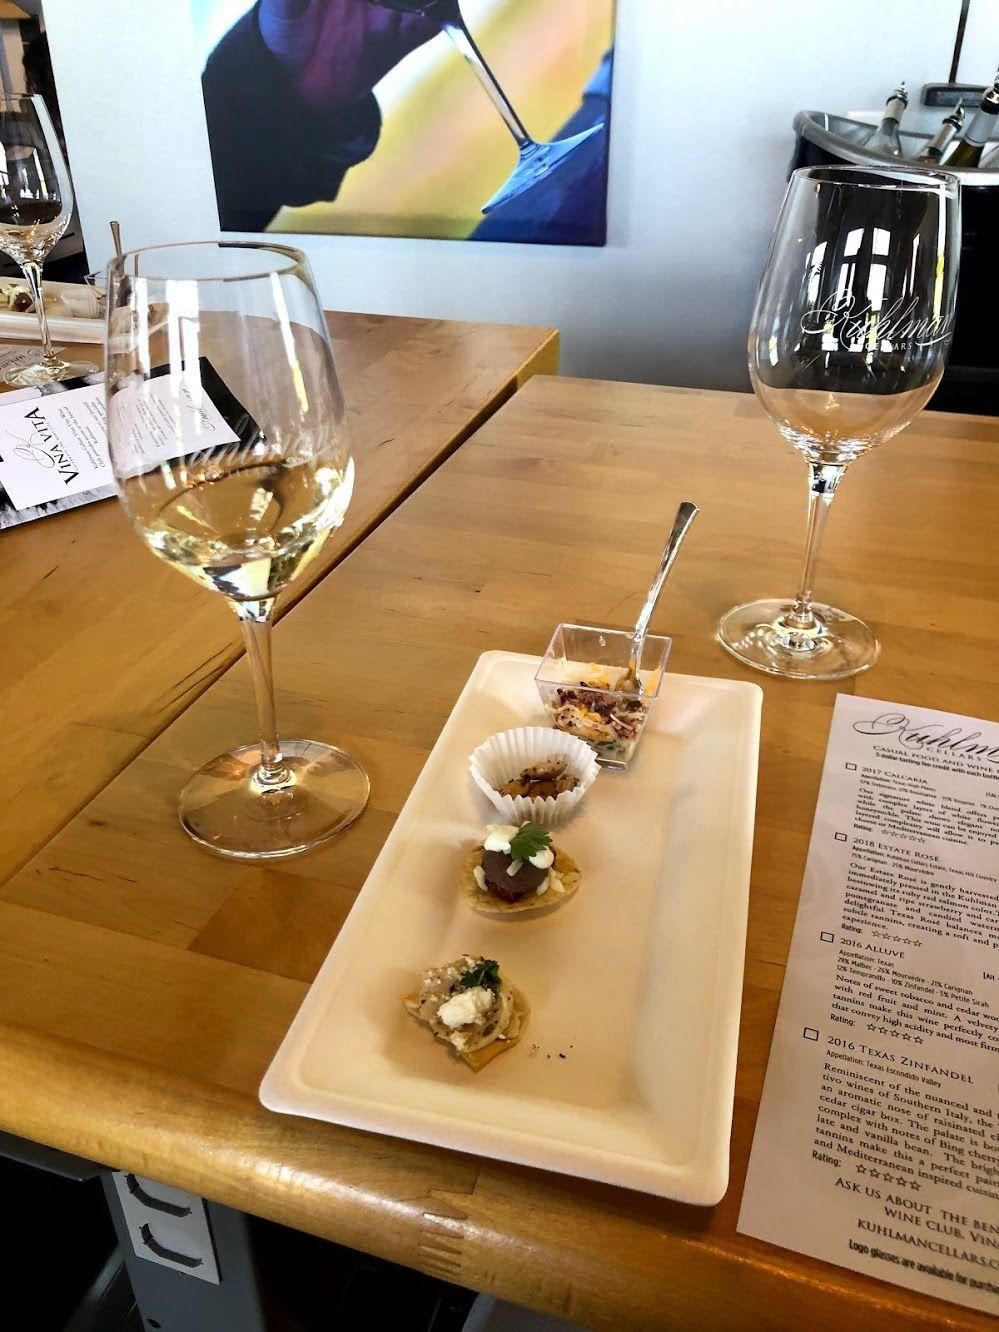 A plate with mini tastings next to some wine glasses at Kuhlan Cellars.